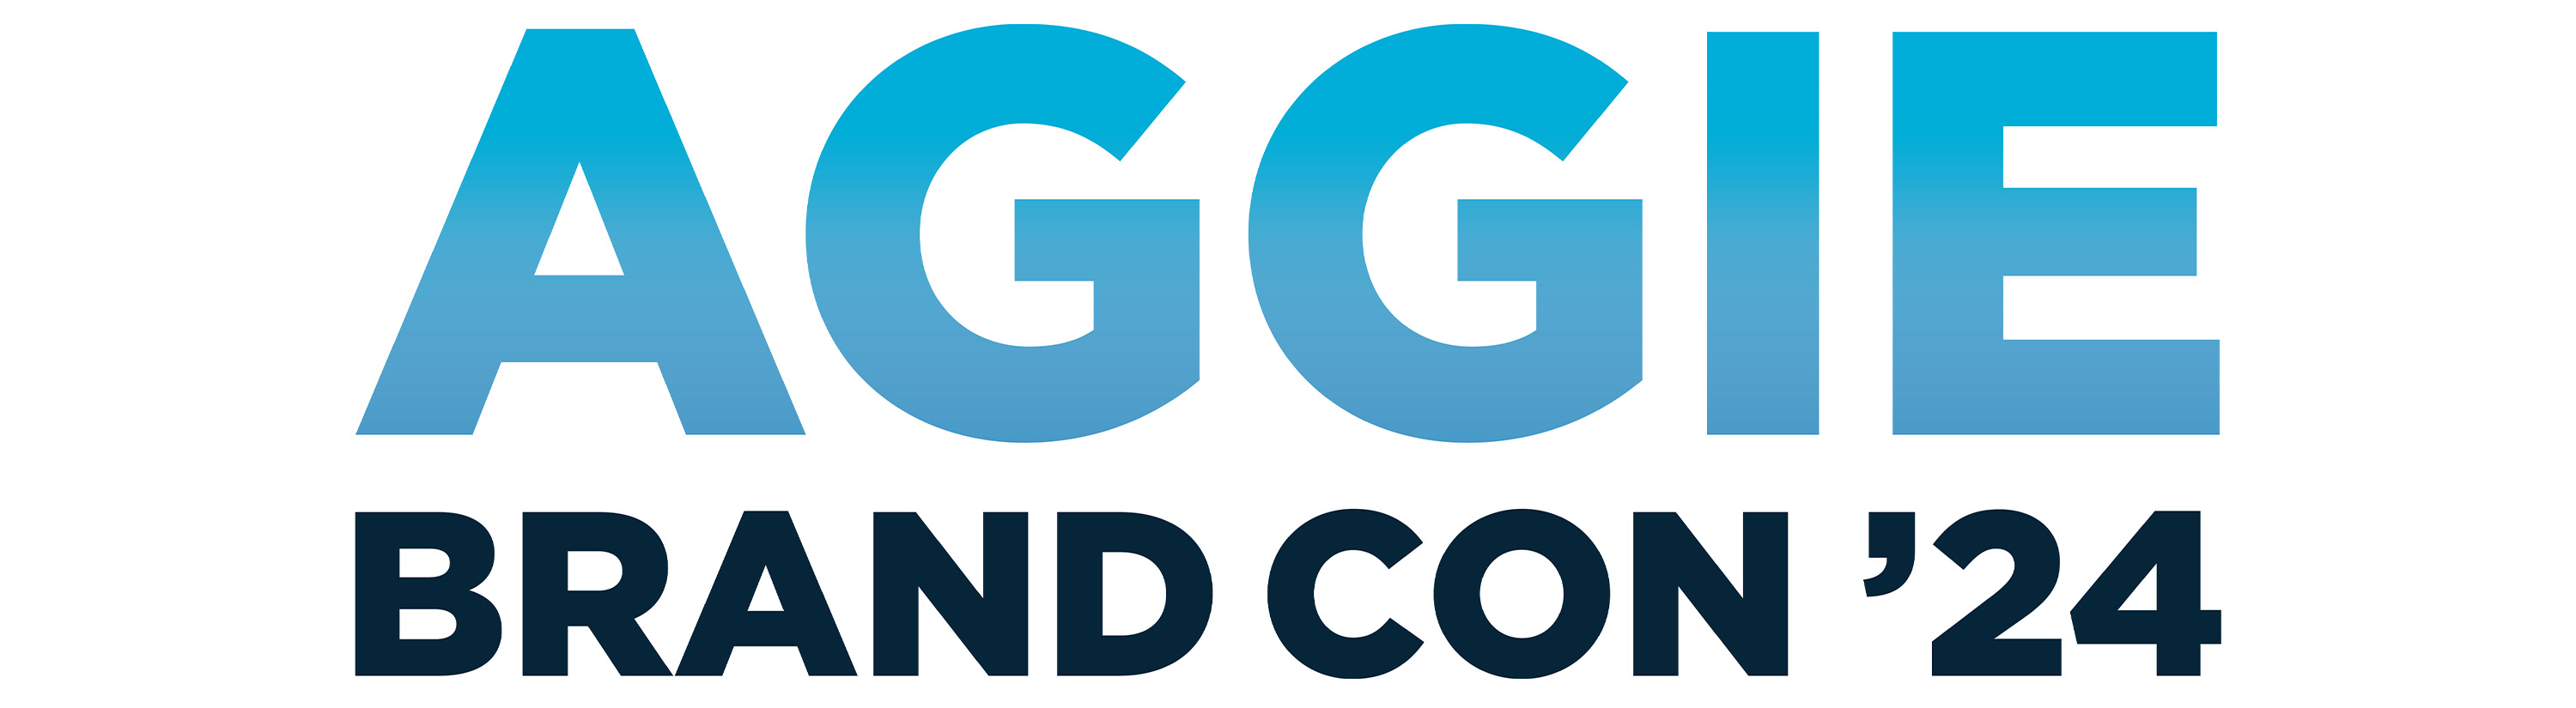 Aggie Brand Conference logo